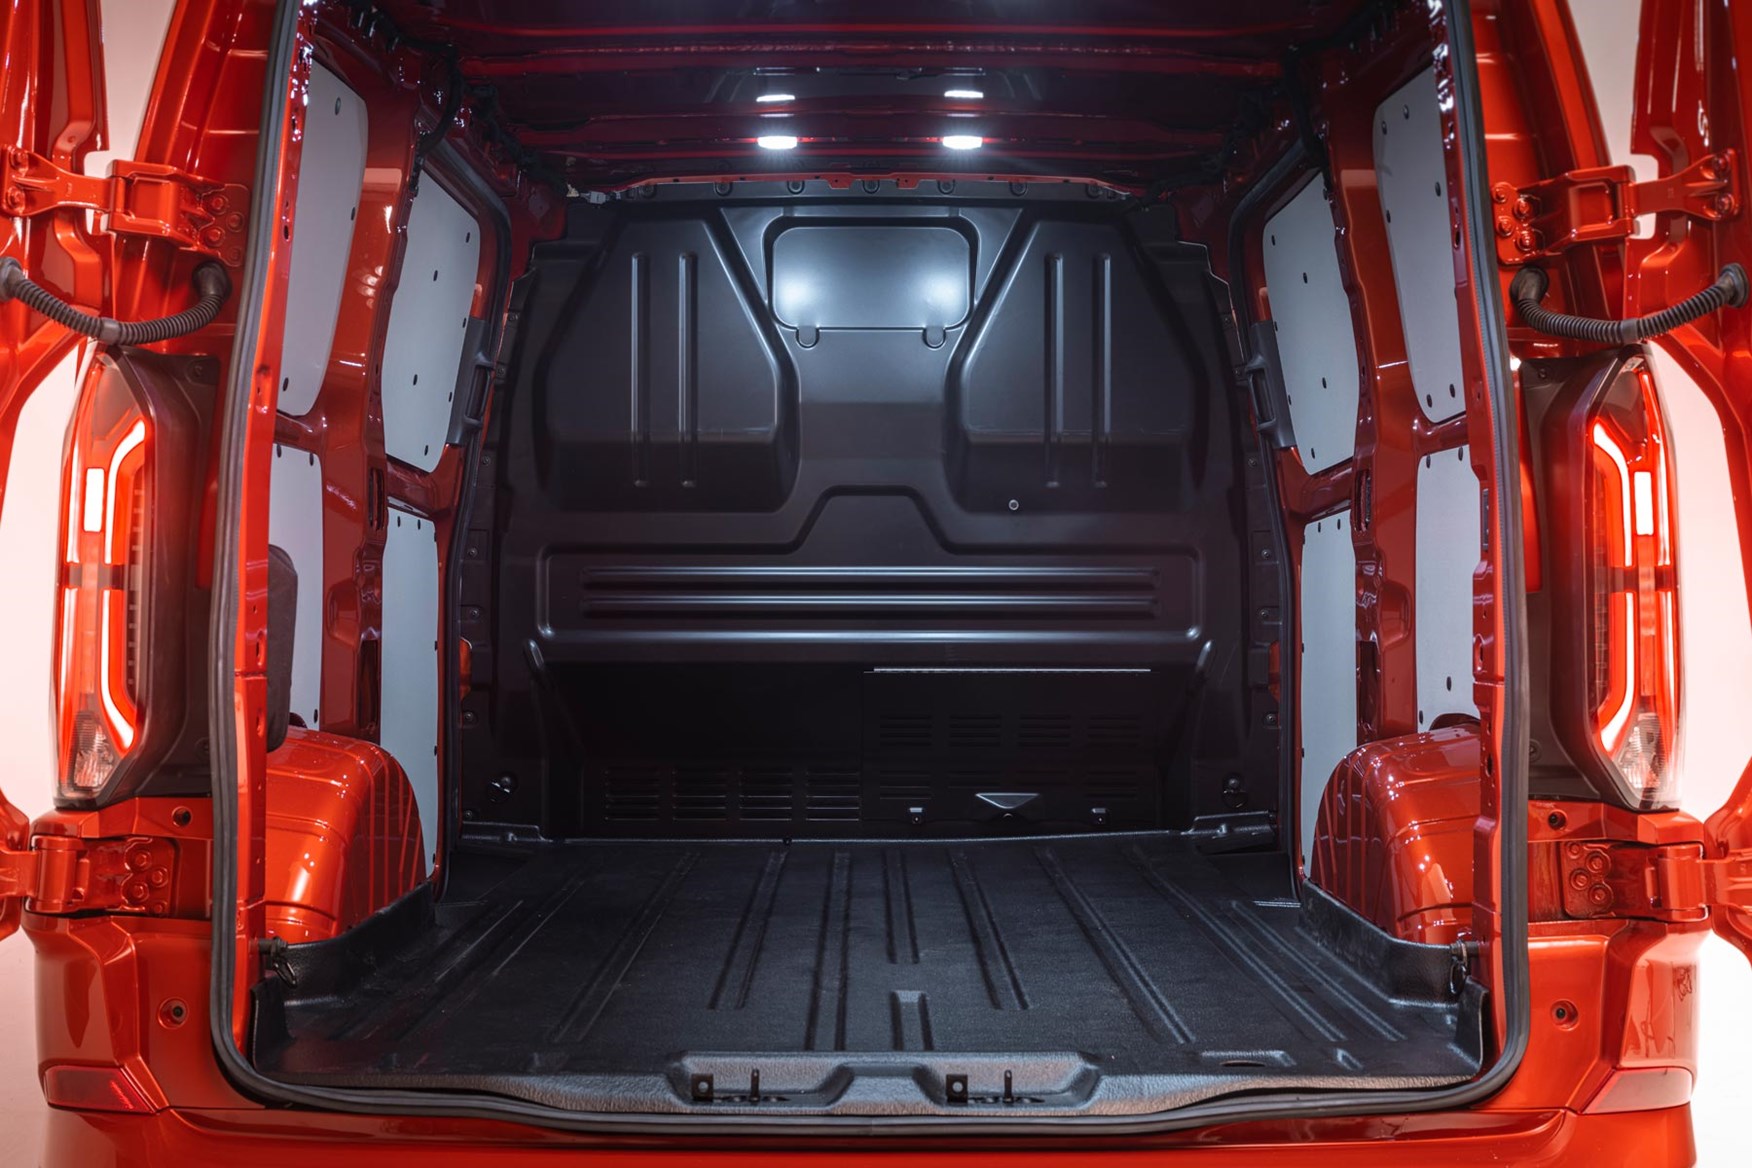 You can get several linings as standard in the Ford Transit Custom.